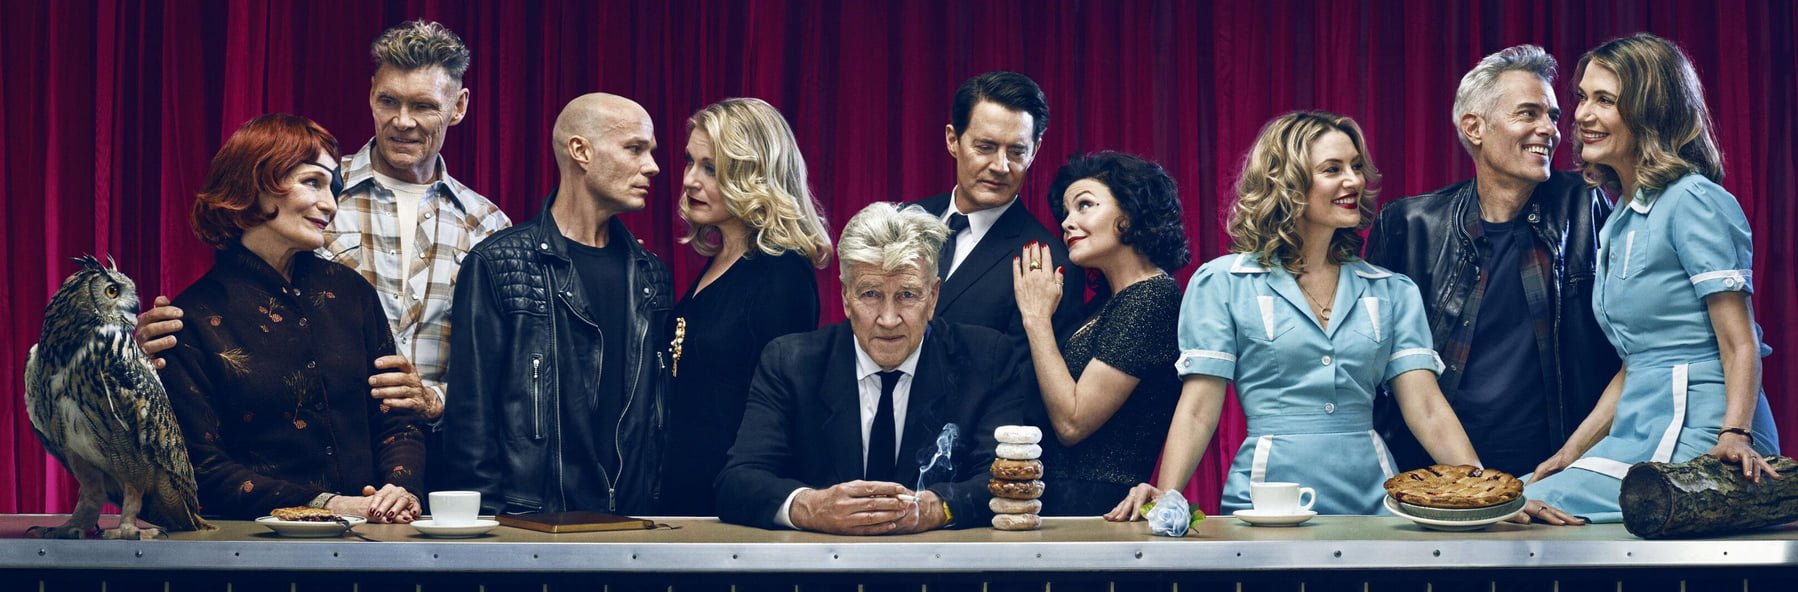 Damn Fine! Load up on cherry pie, it is happening again. Twin Peaks returns on Monday